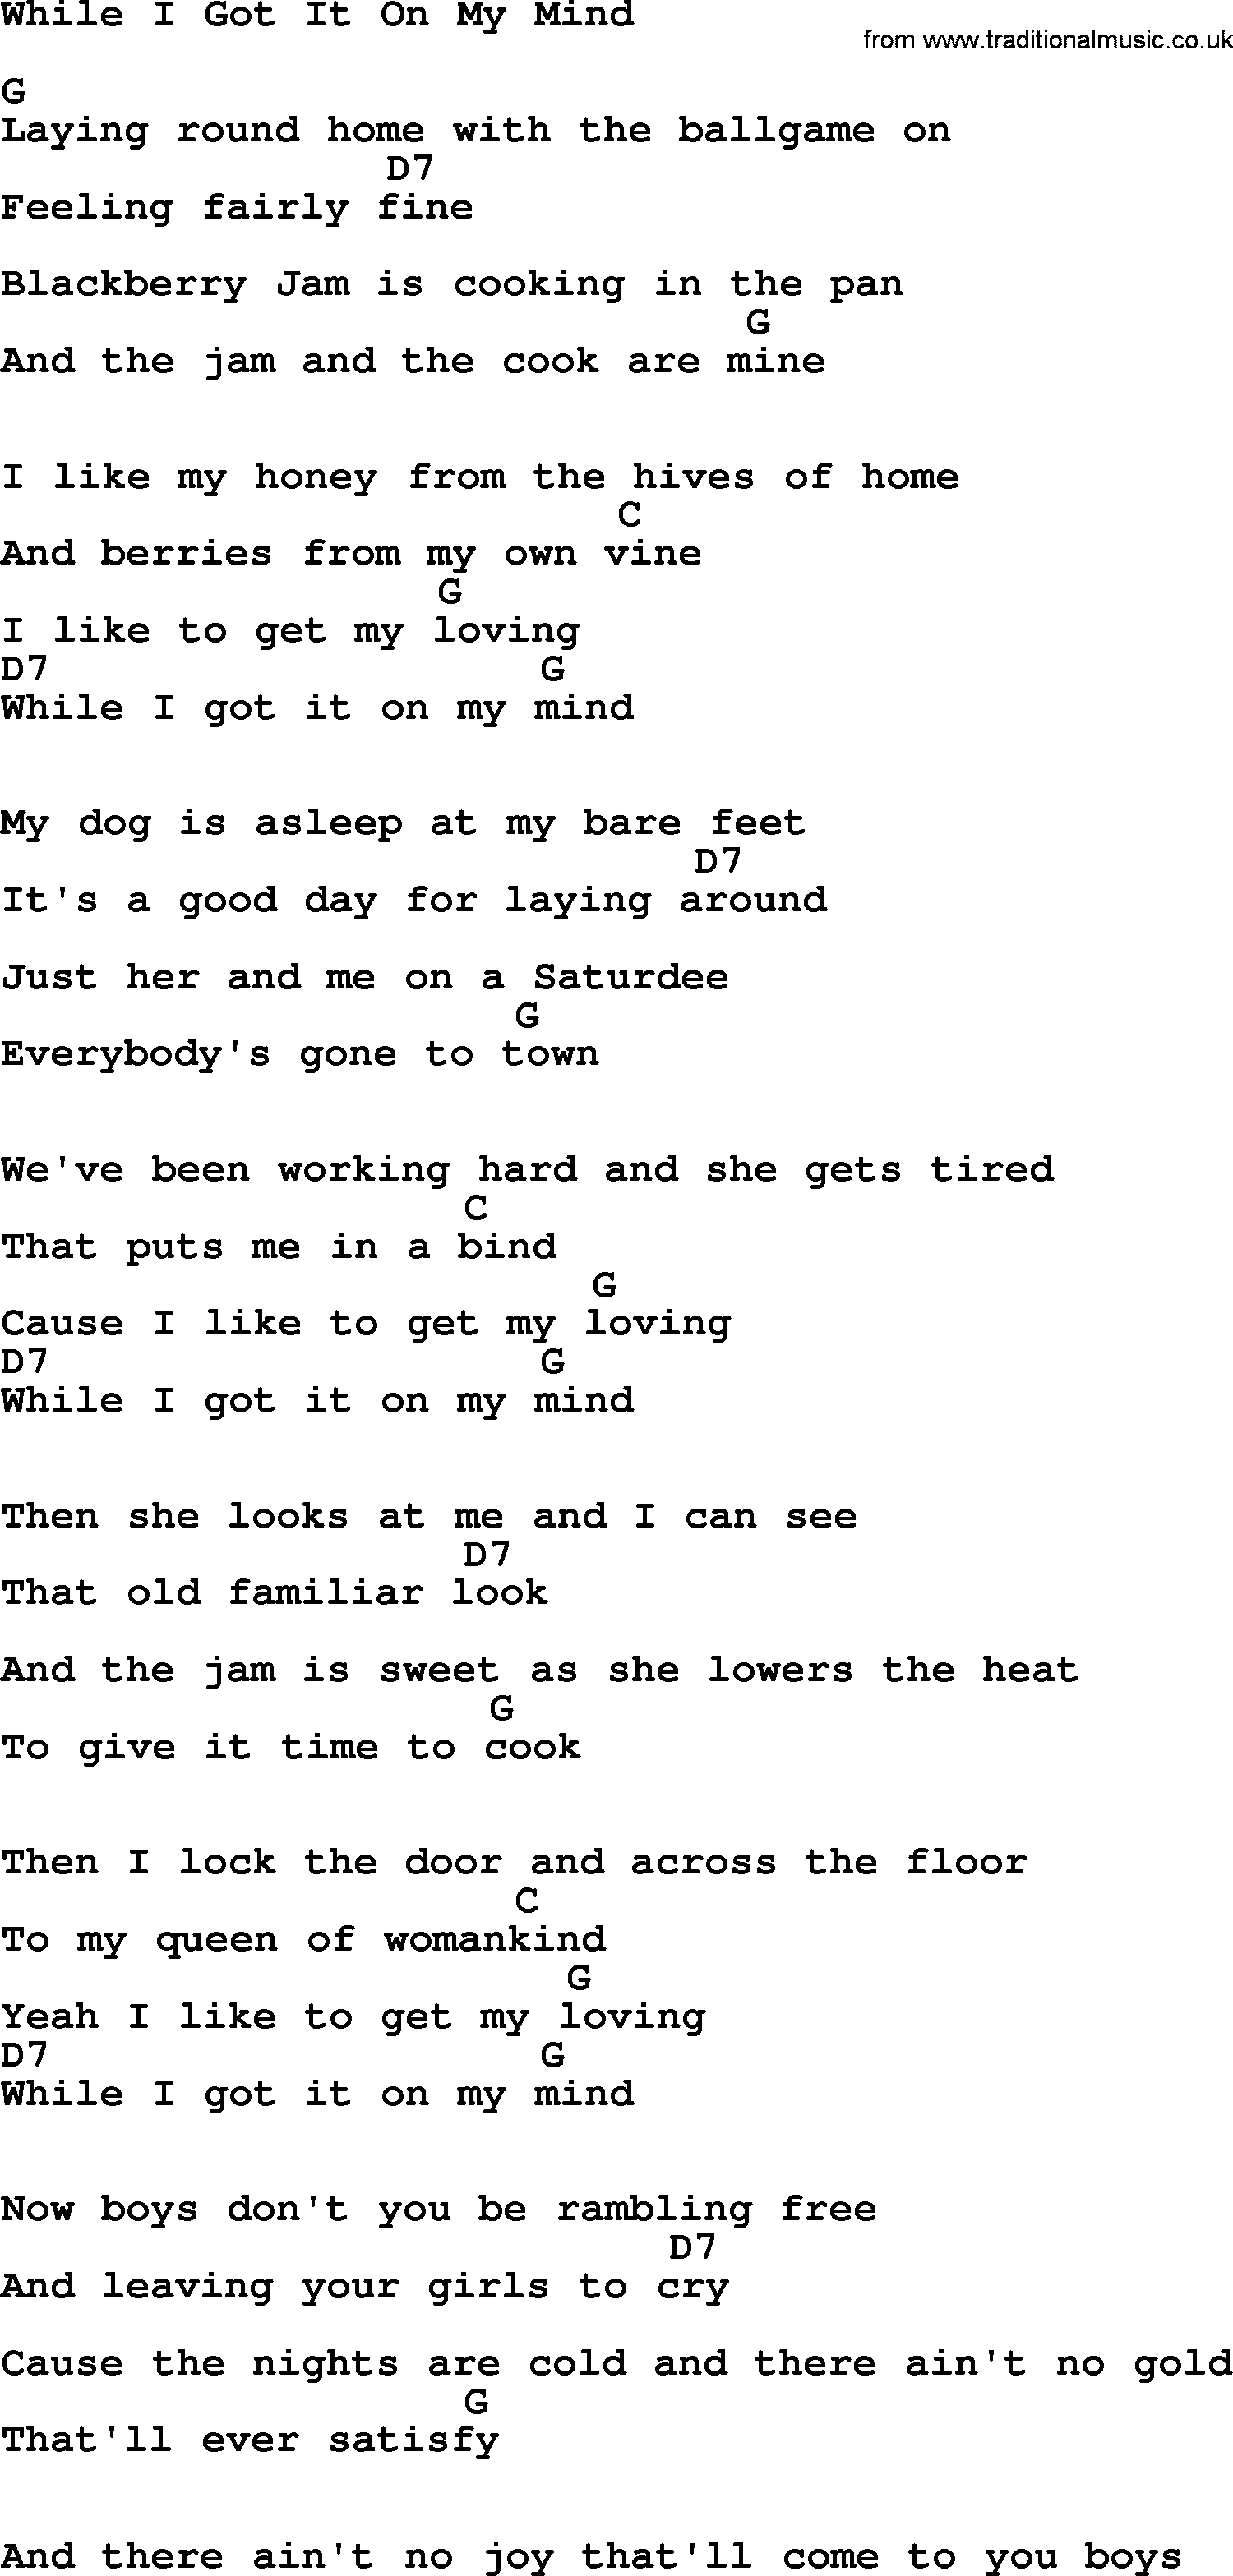 Johnny Cash song While I Got It On My Mind, lyrics and chords